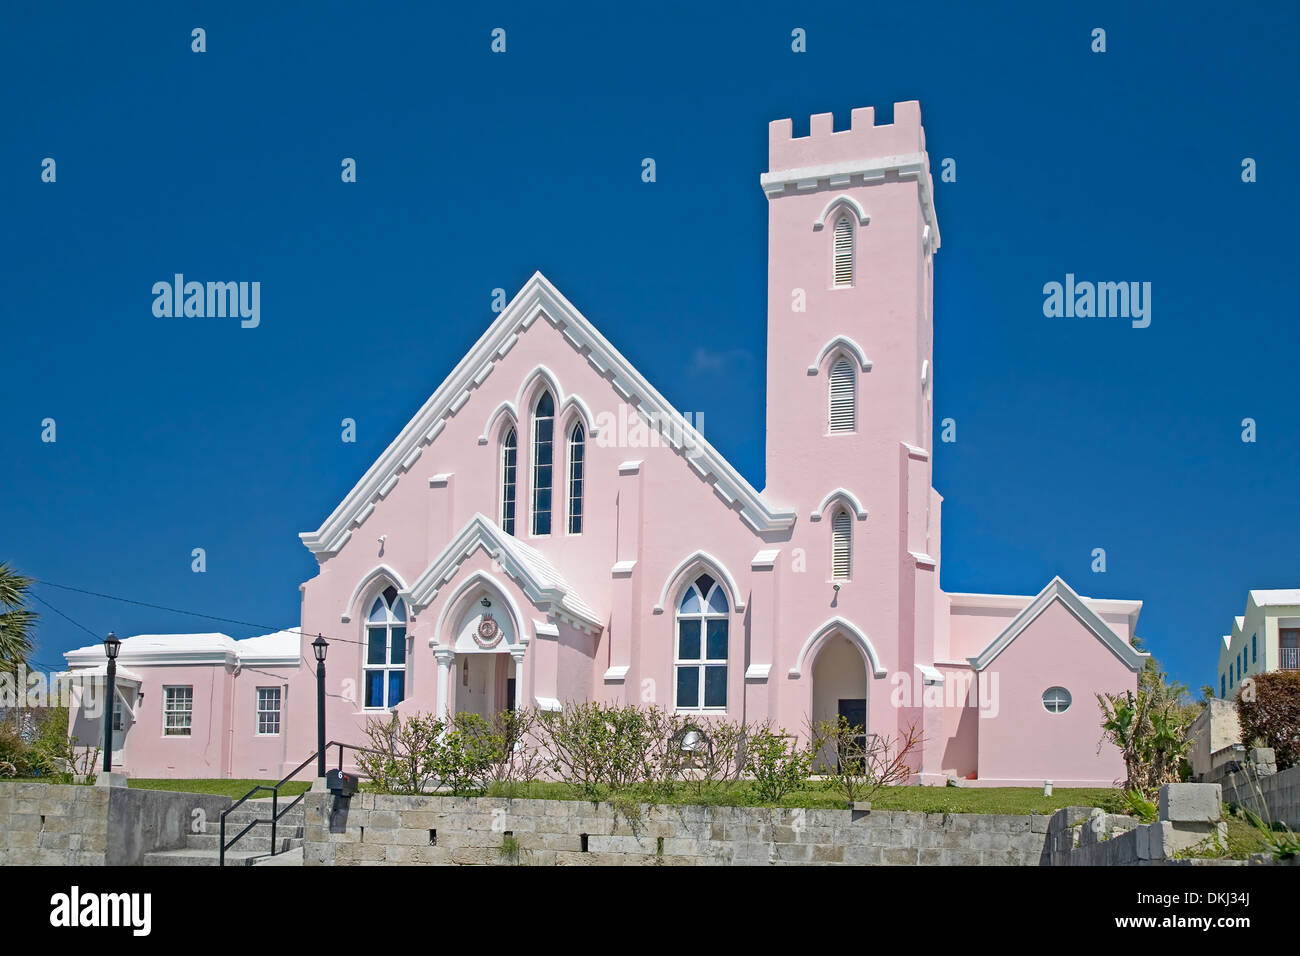 The pink Salvation Army Church in St. George's, Bermuda. Stock Photo